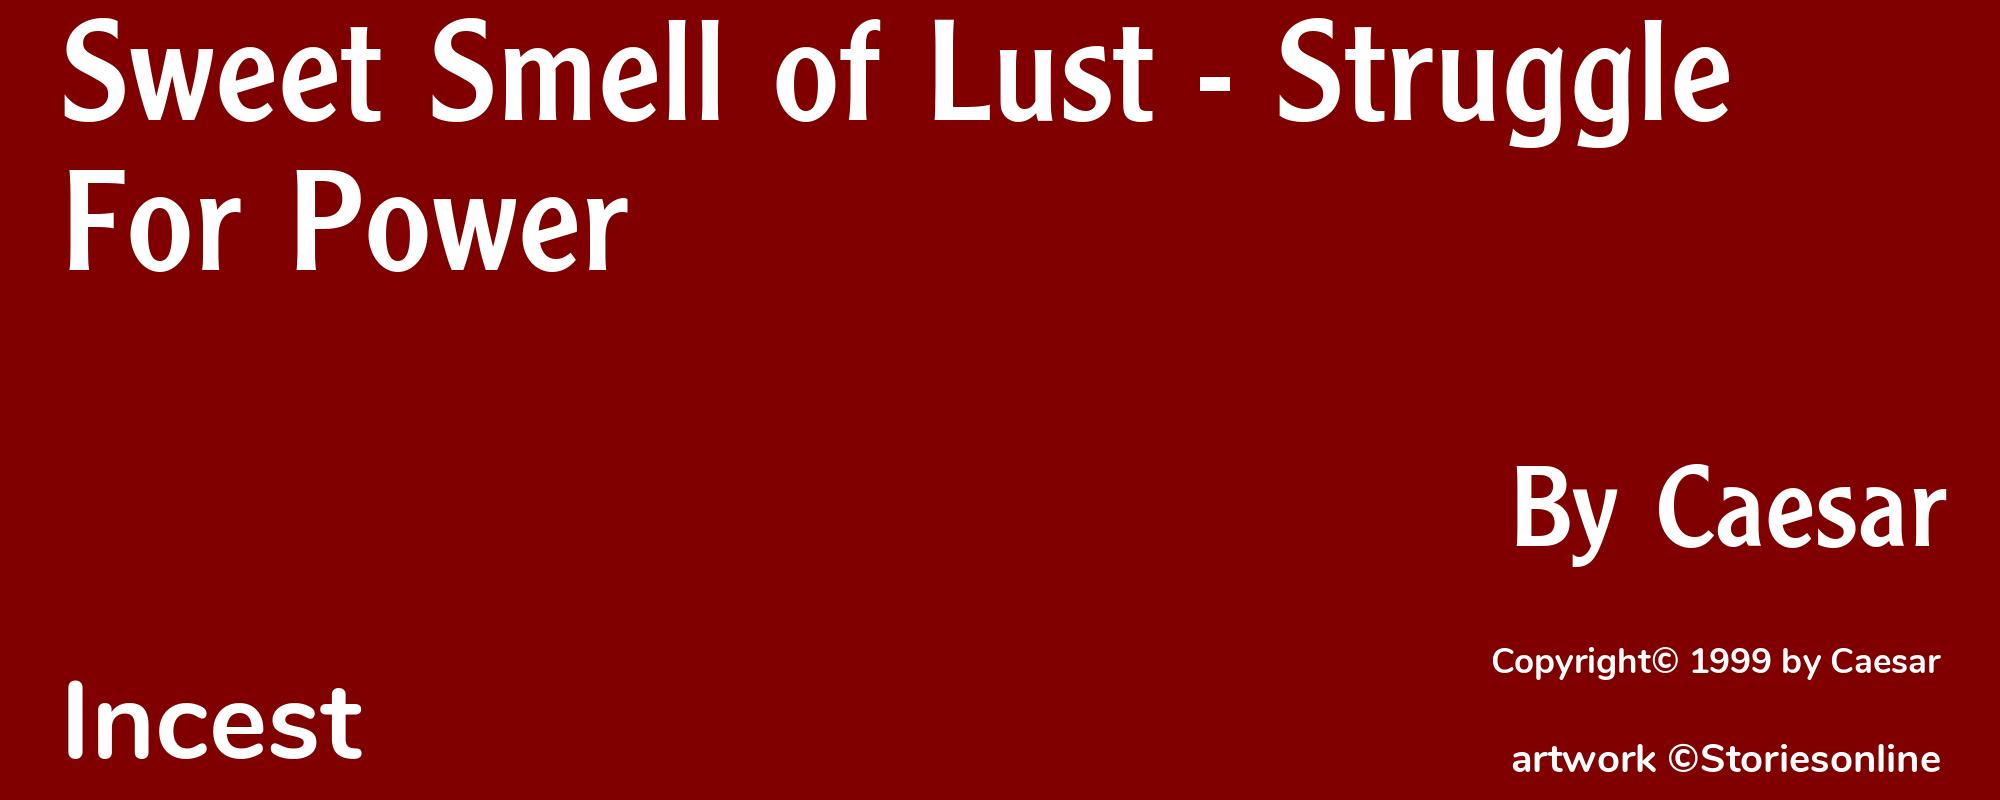 Sweet Smell of Lust - Struggle For Power - Cover